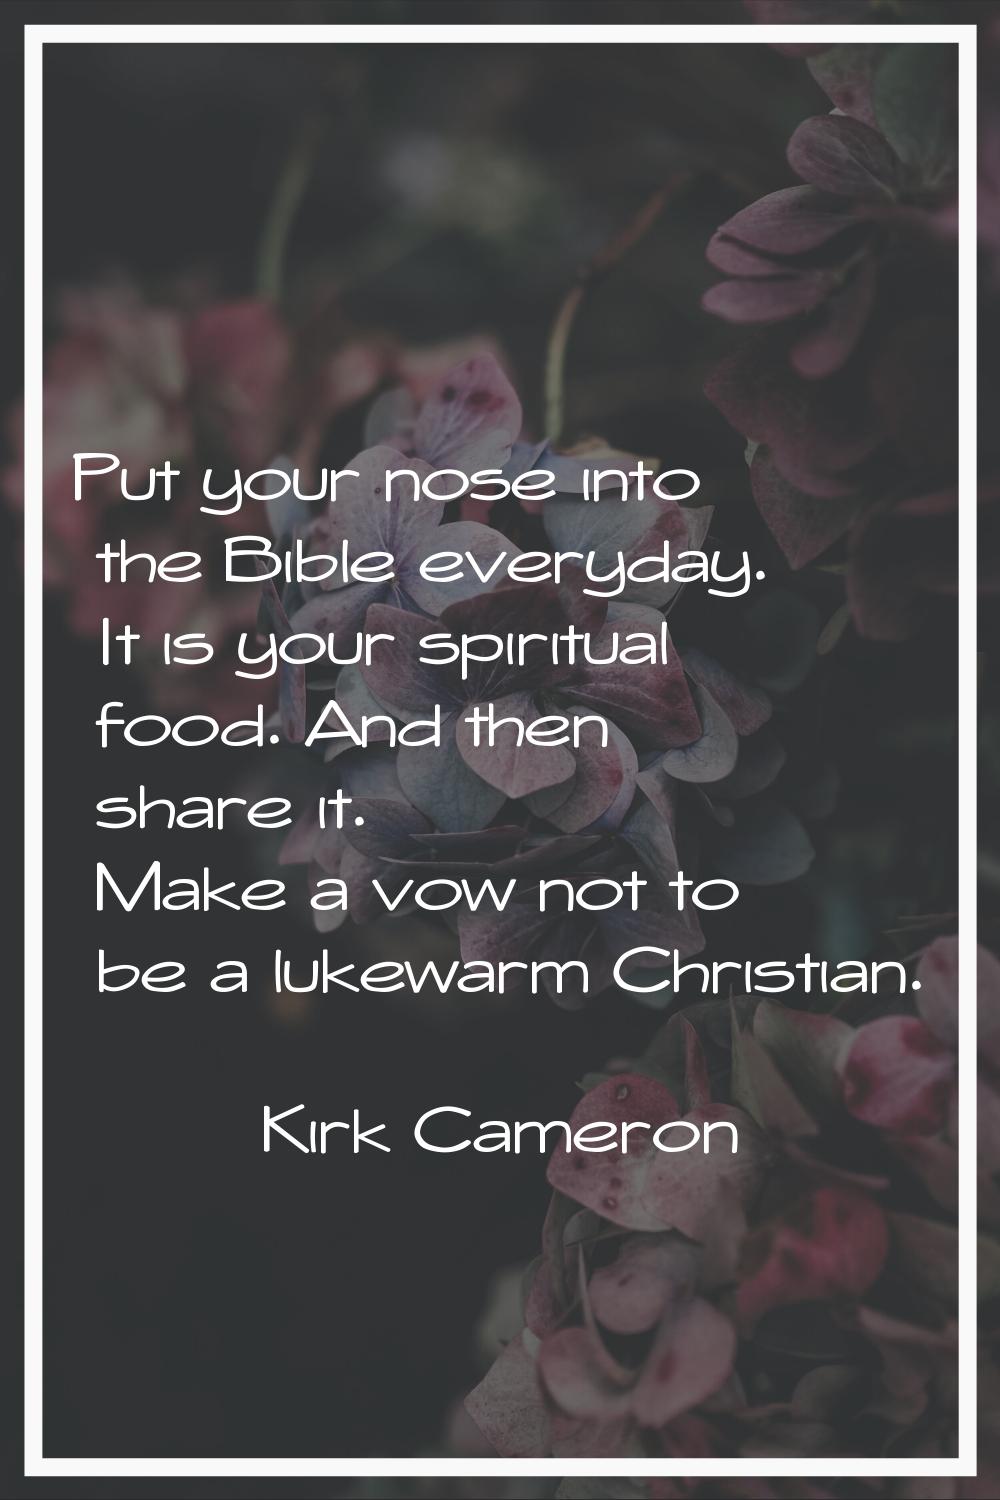 Put your nose into the Bible everyday. It is your spiritual food. And then share it. Make a vow not